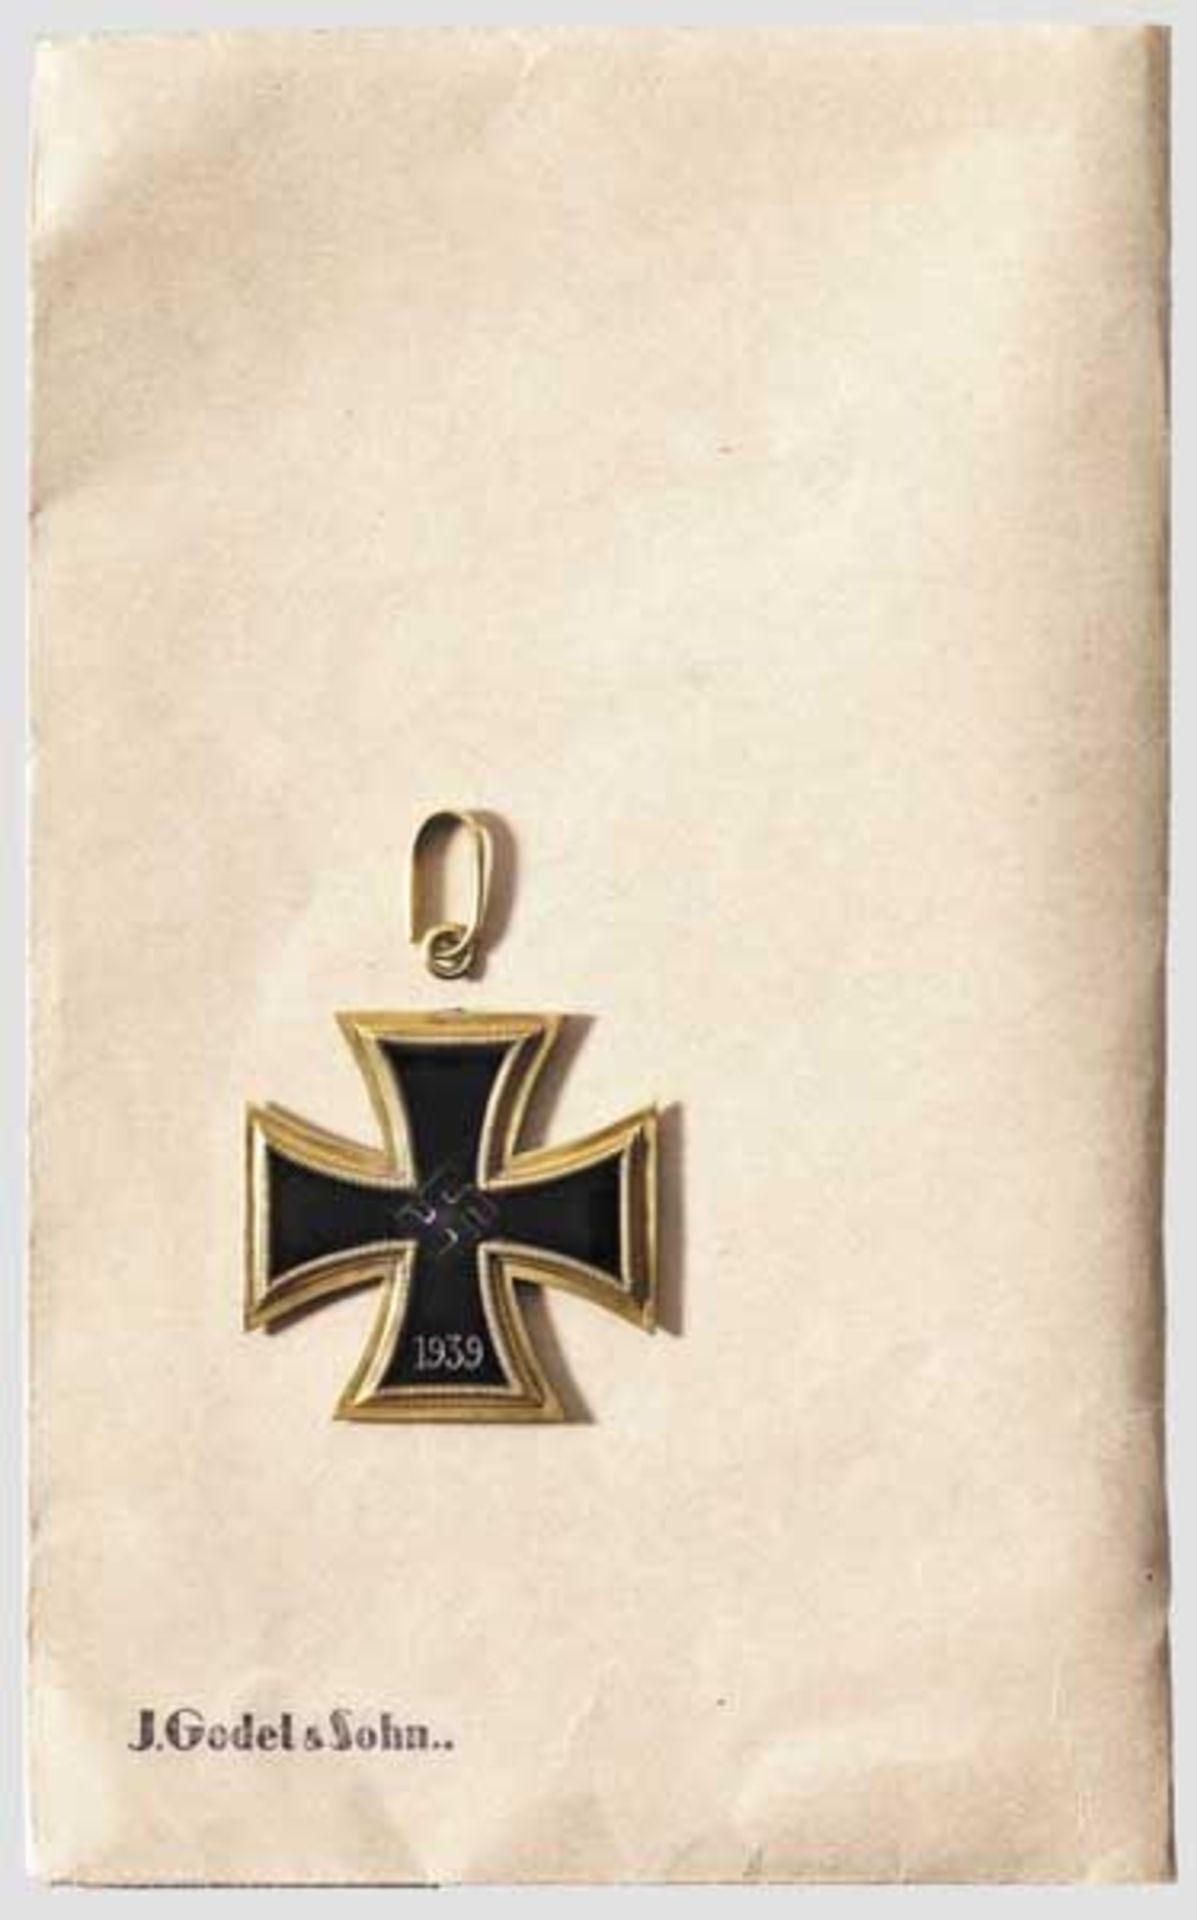 J. Godet & Son - a Grand Cross of the Iron Cross of 1939 in Gold and Onyx - probably a workshop